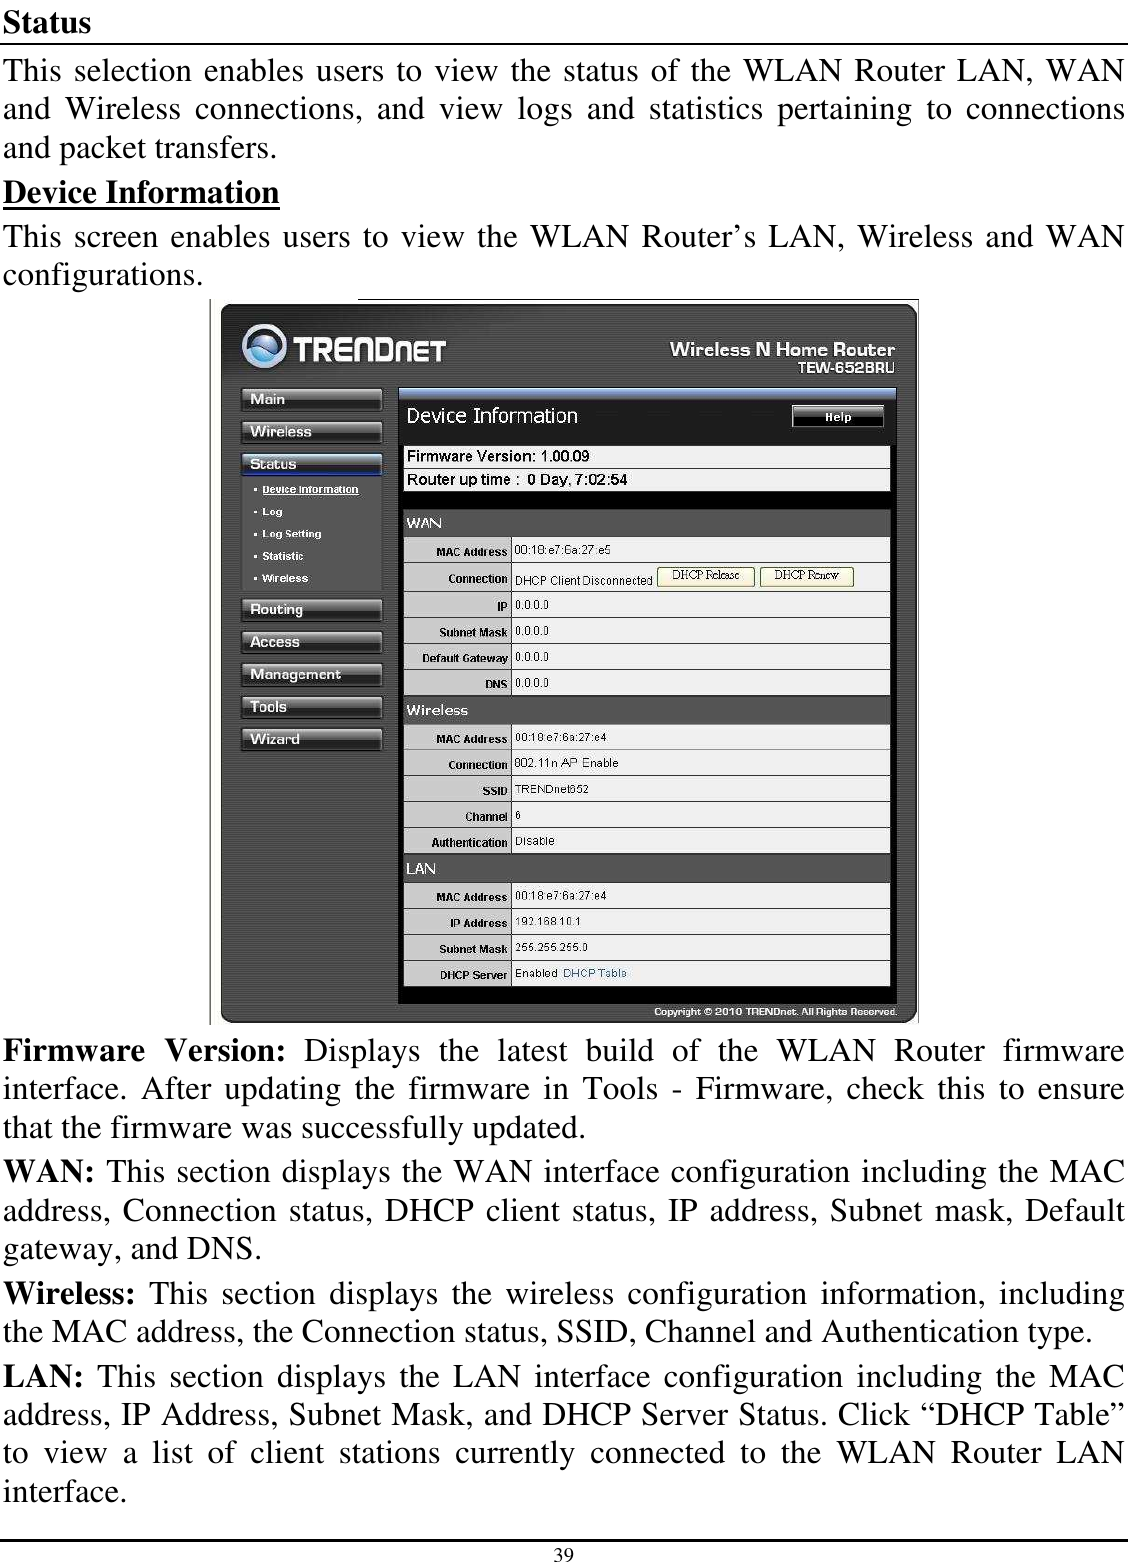 39 Status This selection enables users to view the status of the WLAN Router LAN, WAN and  Wireless  connections,  and  view  logs  and  statistics  pertaining  to  connections and packet transfers. Device Information This screen enables users to view the WLAN Router’s LAN, Wireless and WAN configurations.  Firmware  Version:  Displays  the  latest  build  of  the  WLAN  Router  firmware interface.  After updating  the firmware in  Tools  - Firmware,  check this to ensure that the firmware was successfully updated. WAN: This section displays the WAN interface configuration including the MAC address, Connection status, DHCP client status, IP address, Subnet mask, Default gateway, and DNS.  Wireless:  This section displays  the  wireless configuration information,  including the MAC address, the Connection status, SSID, Channel and Authentication type. LAN: This section displays the LAN interface  configuration including  the  MAC address, IP Address, Subnet Mask, and DHCP Server Status. Click “DHCP Table” to  view  a  list  of  client  stations  currently  connected  to  the  WLAN  Router  LAN interface. 